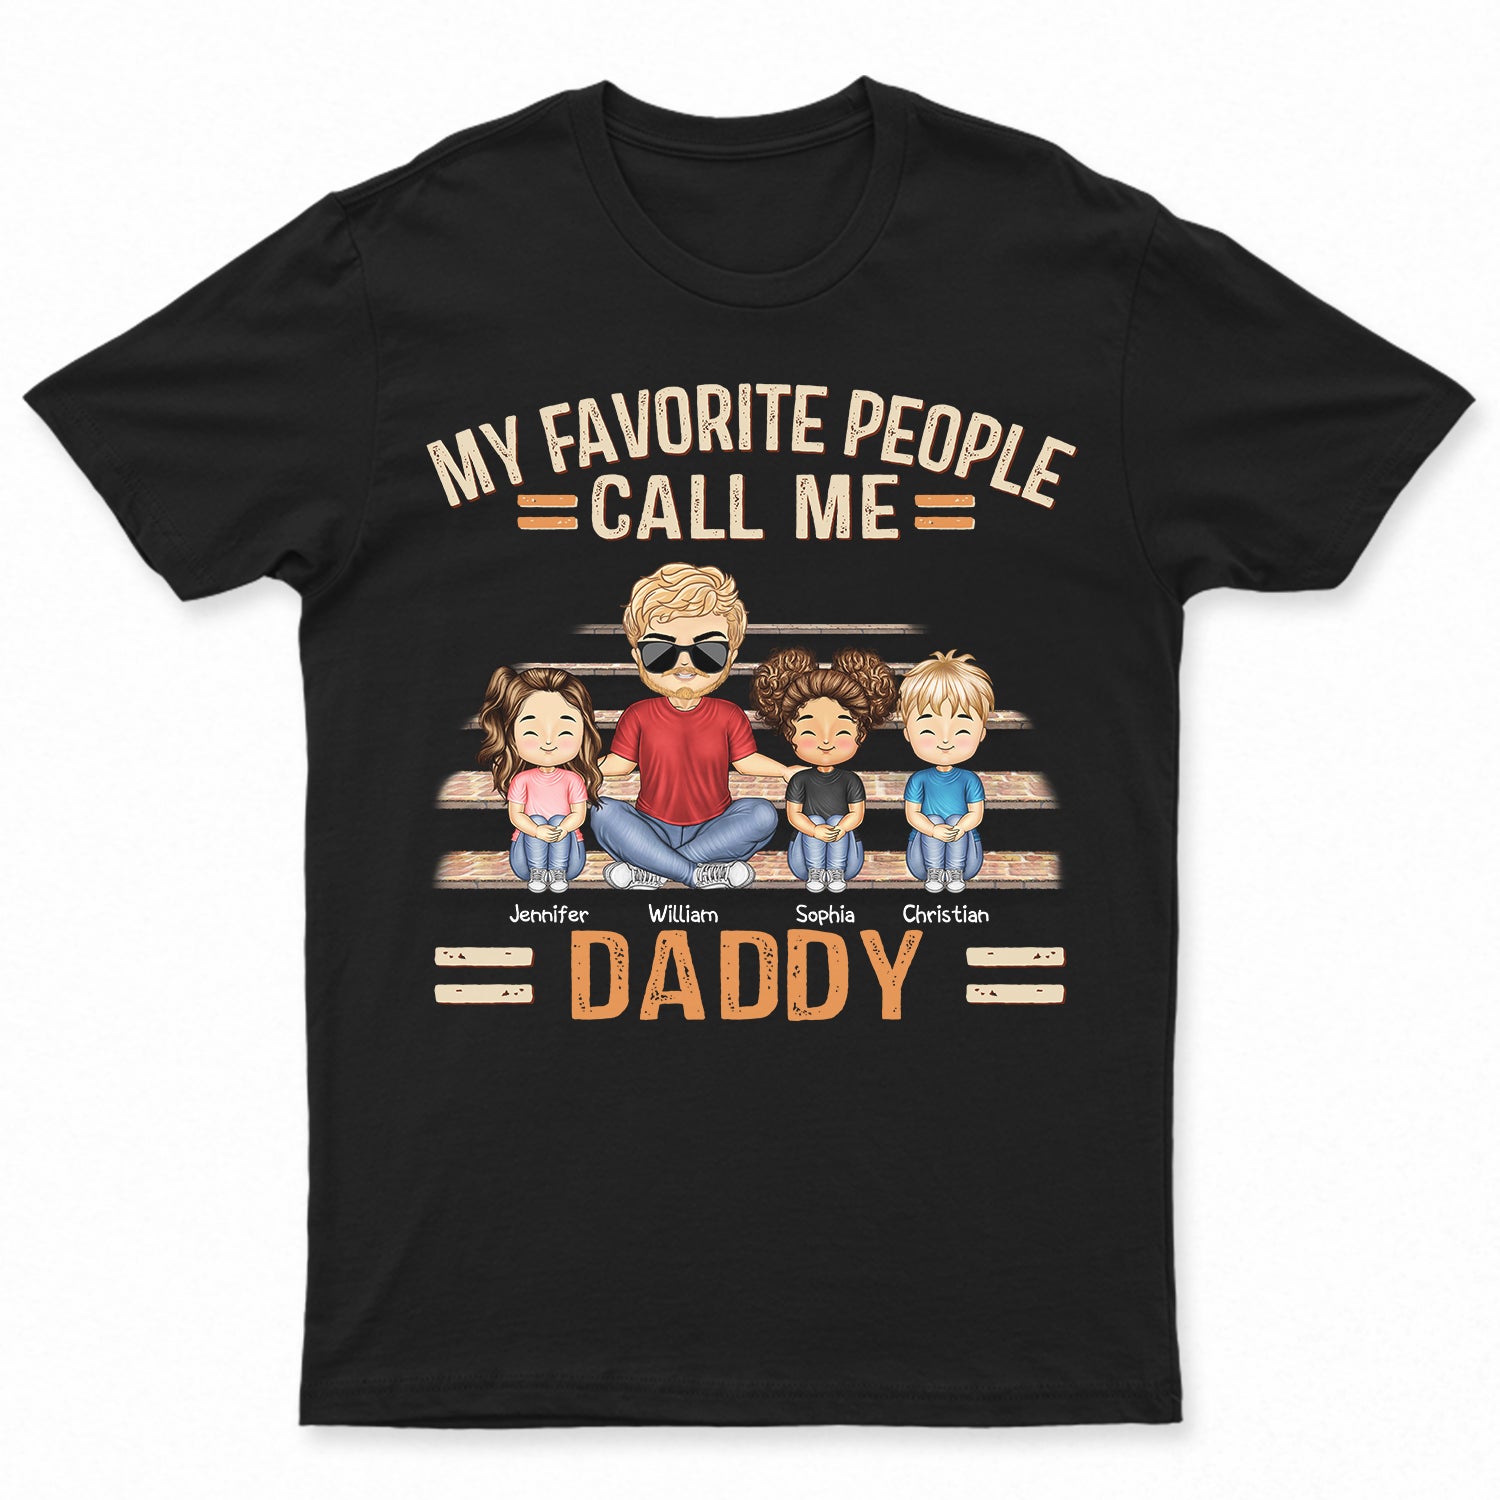 My Favorite People Call Me Dad Grandpa - Birthday, Loving Gift For Father, Grandfather - Personalized Custom T Shirt